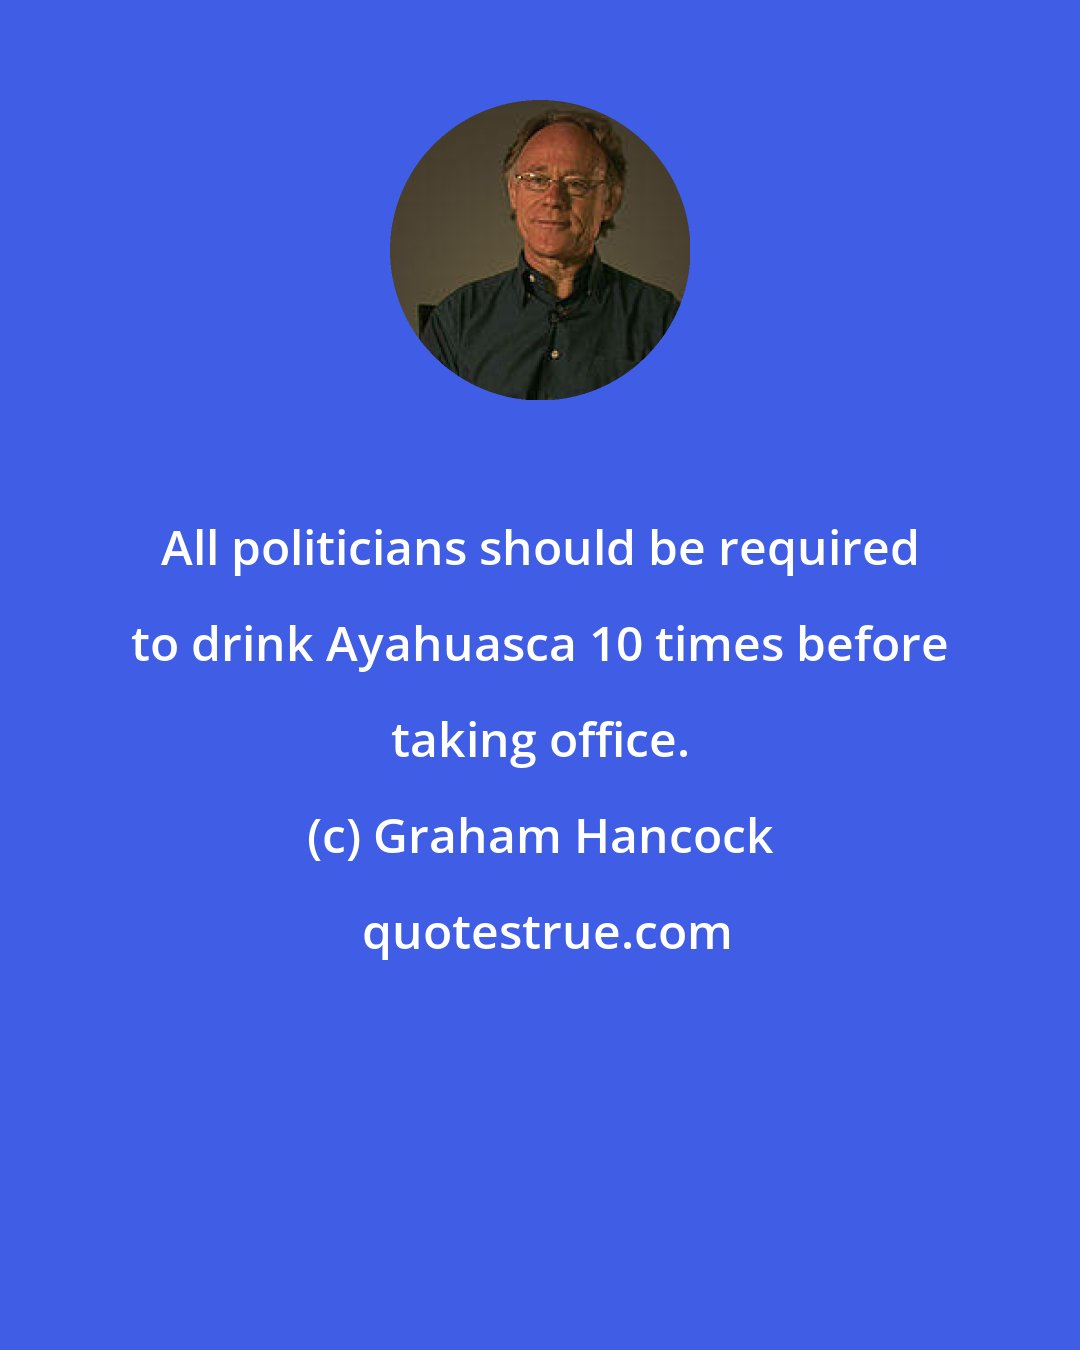 Graham Hancock: All politicians should be required to drink Ayahuasca 10 times before taking office.